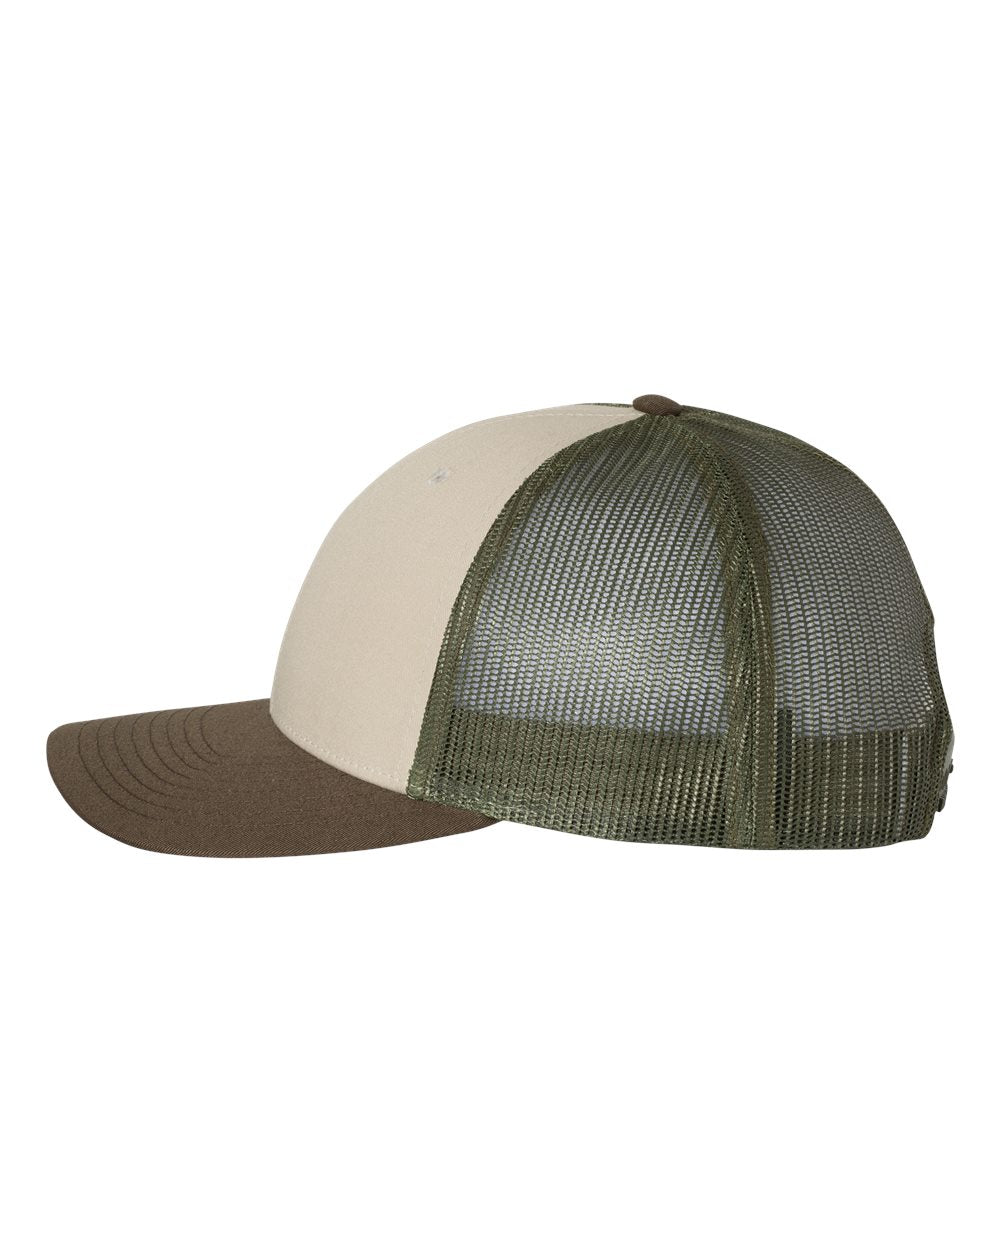 Image of the Kelly Hughes Stateline ID Richardson Cap in Tan/Loden/Brown, Size Md/Lg, featuring a rustic patch and integrated ID slot, perfect for showcasing style and convenience at events with durable construction and a comfortable fit.